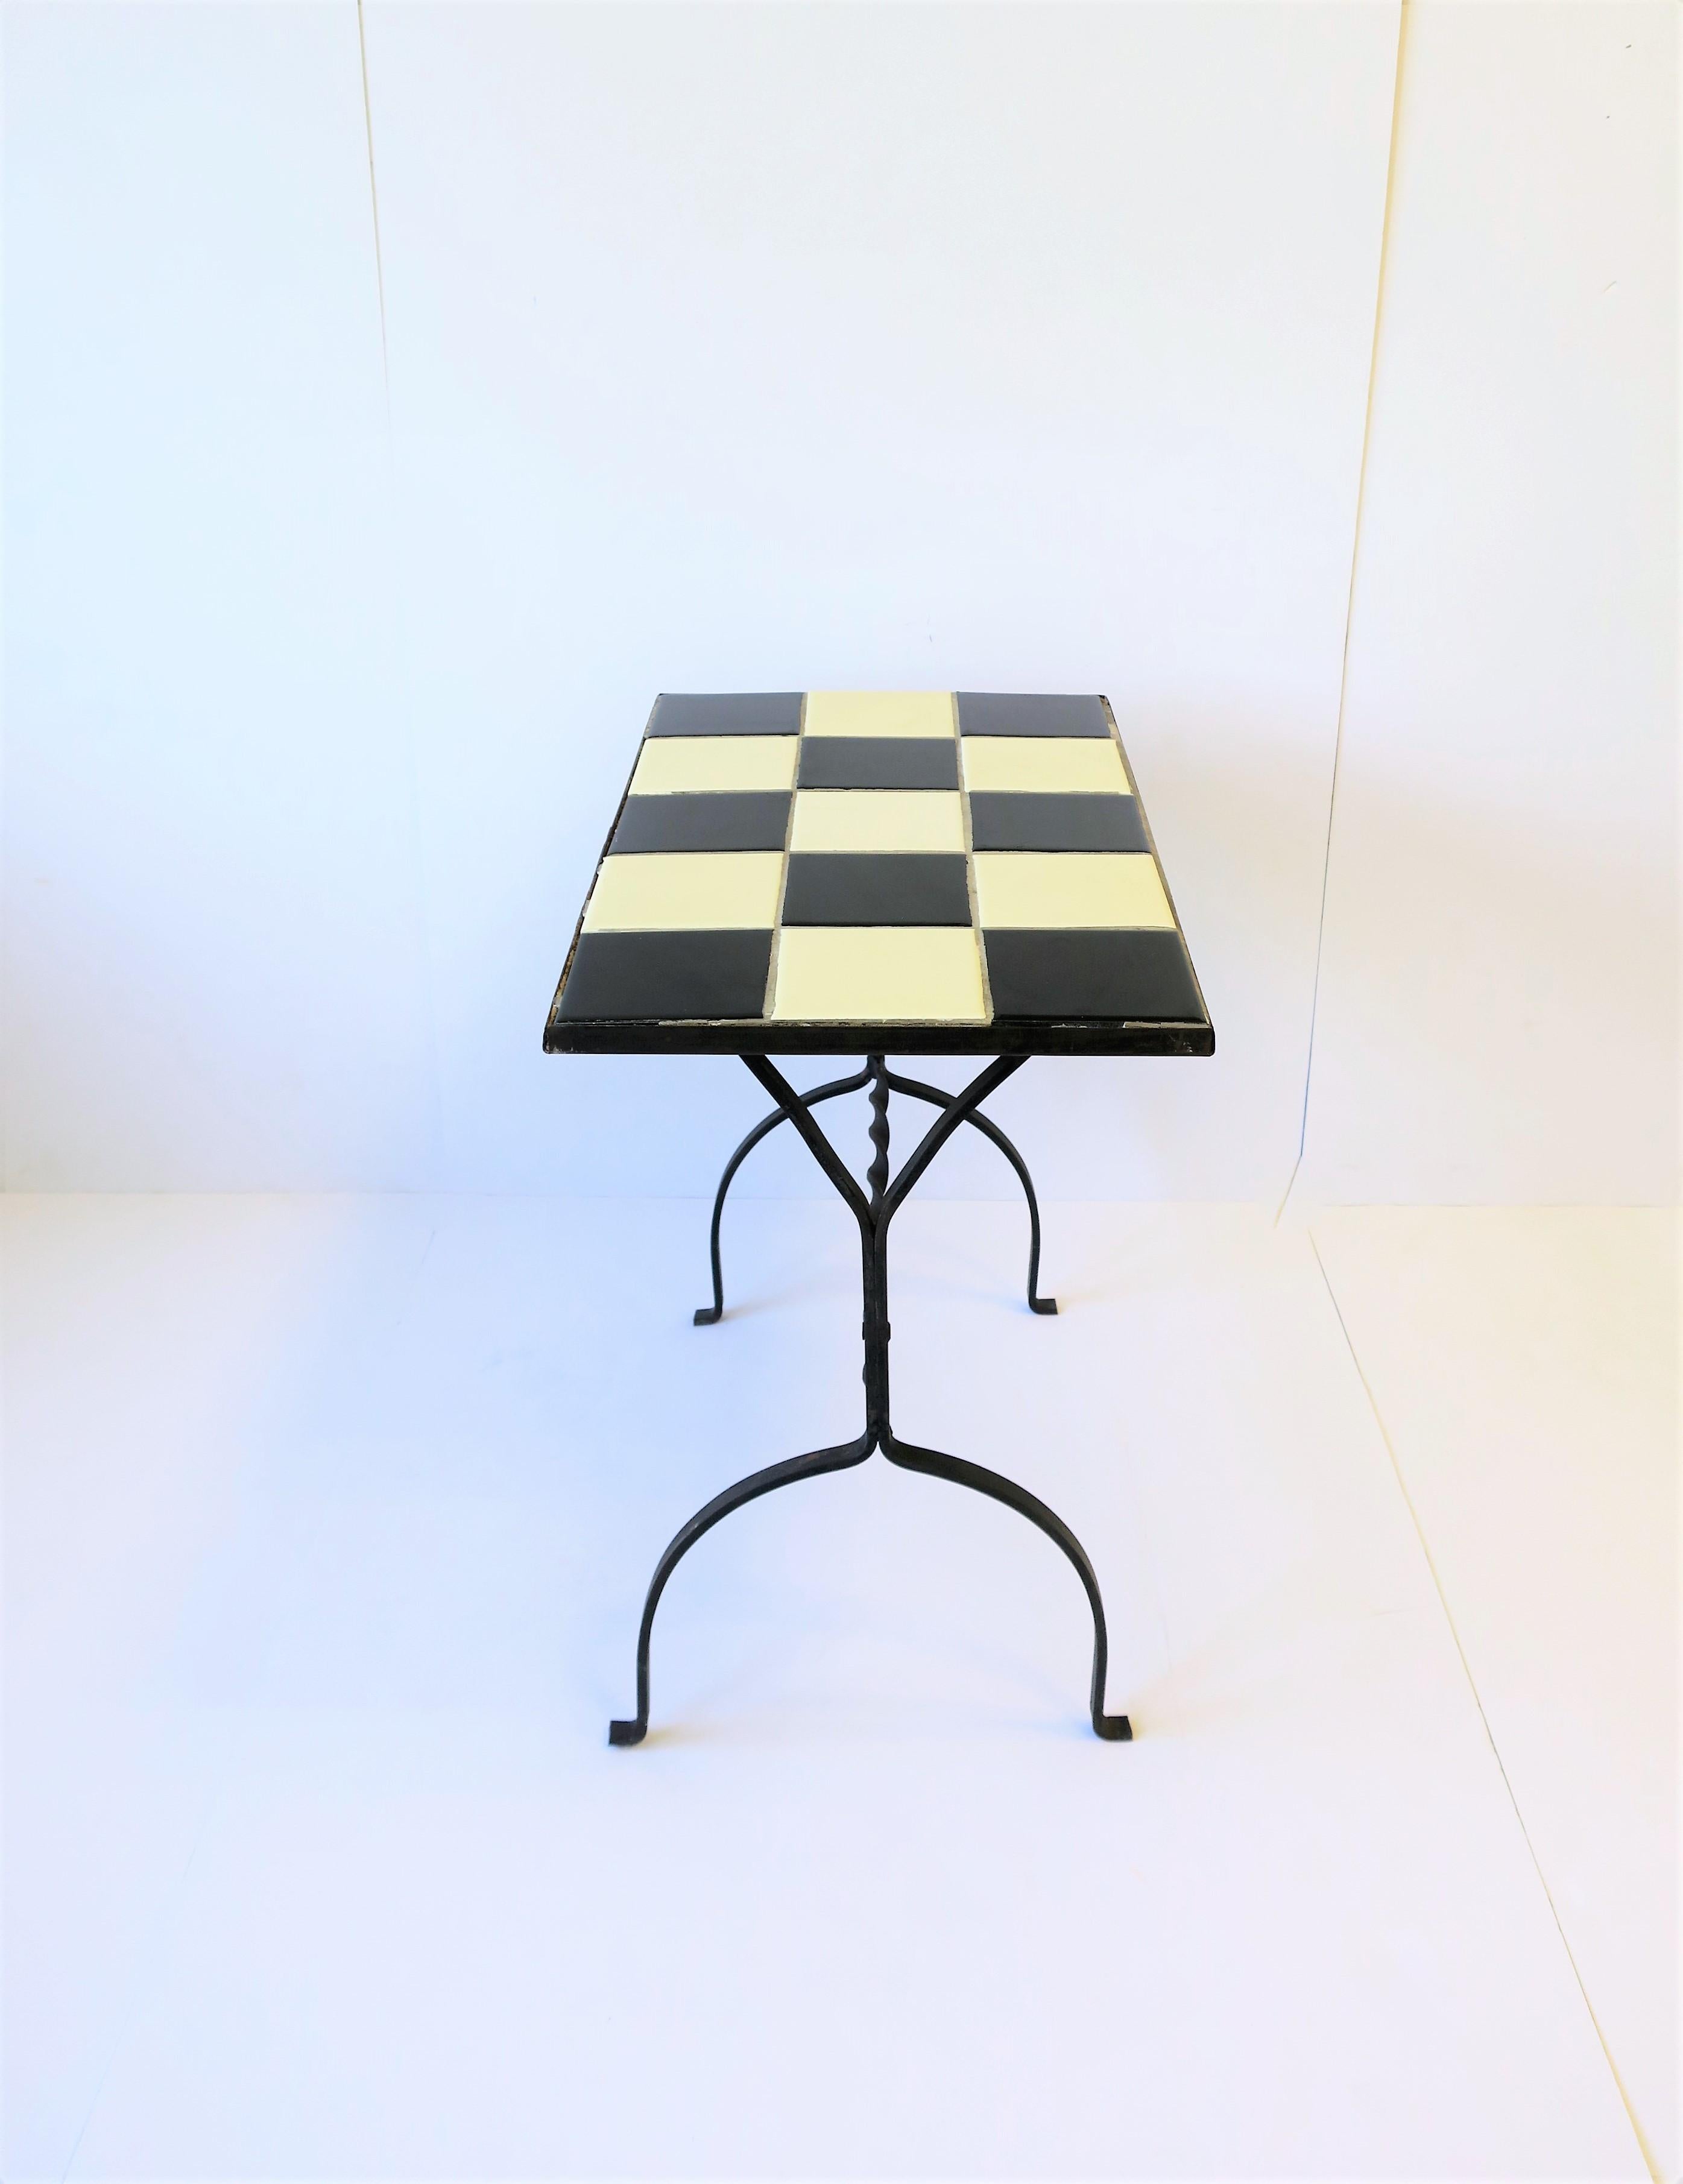 20th Century Mid-Century Modern Black and White Mosaic Tile Side or End Table